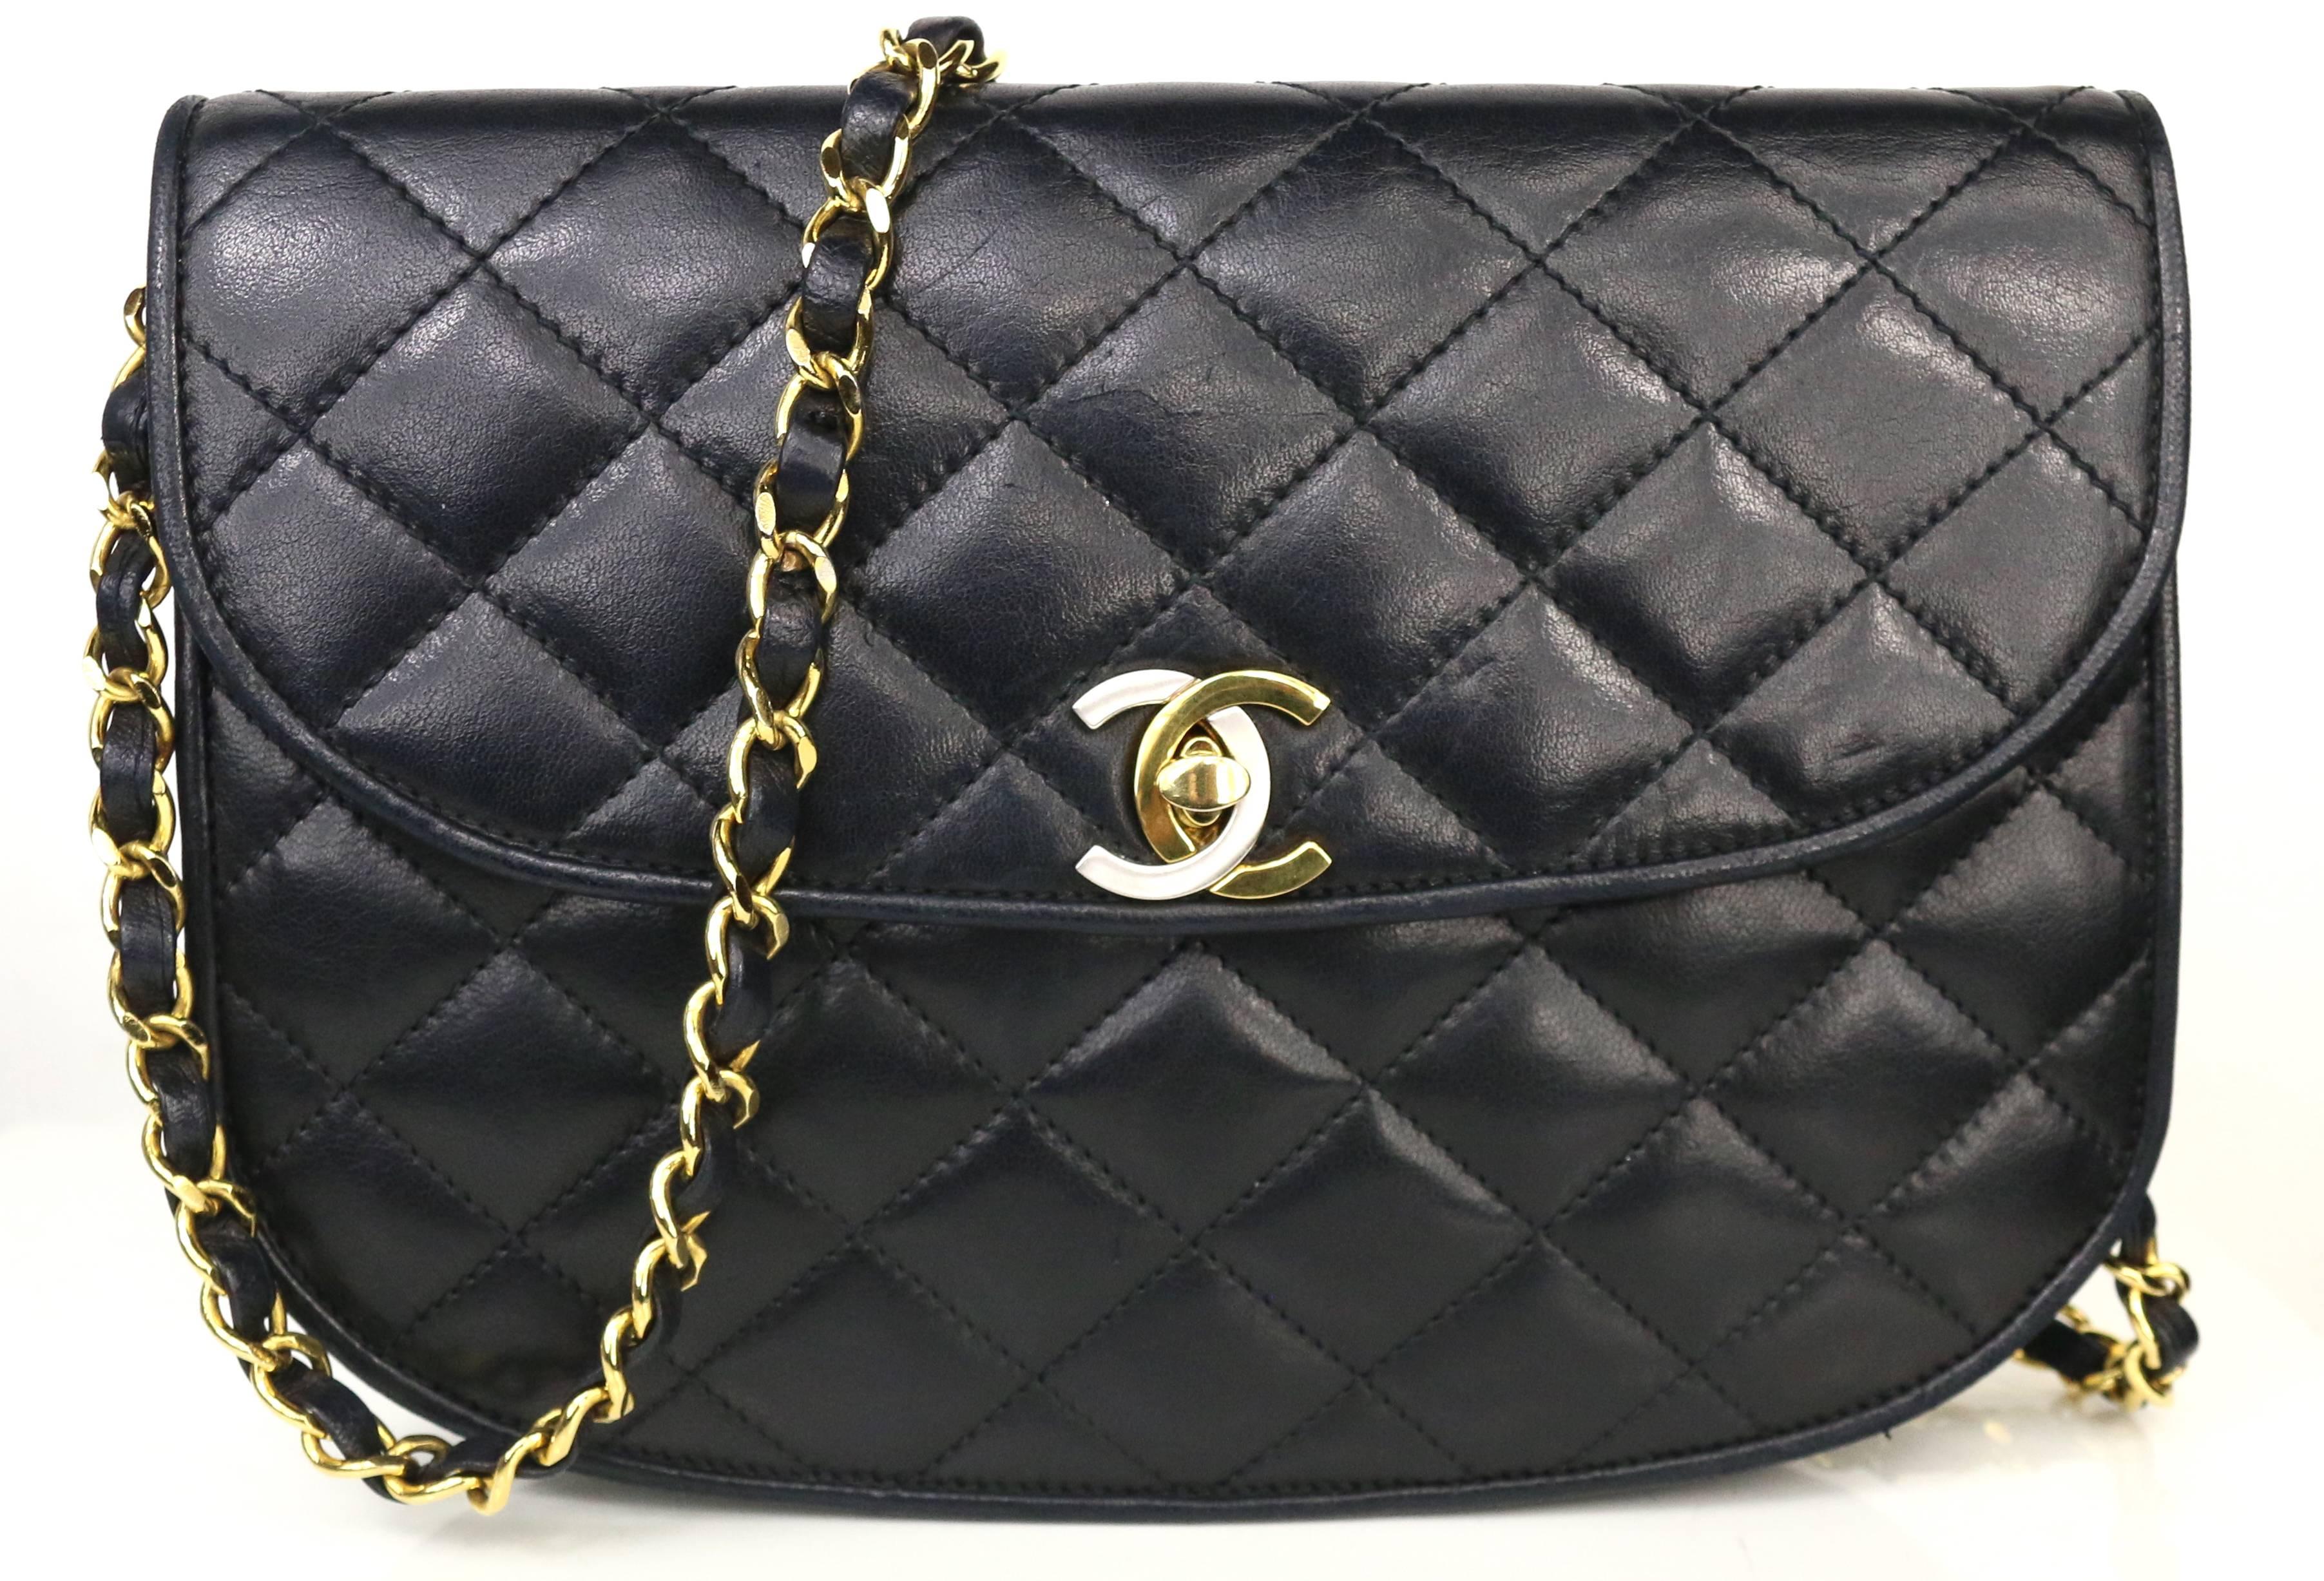 Chanel Semi-Circle Black Quilted Lamb Leather Paris Limited Edition Shoulder Bag 8